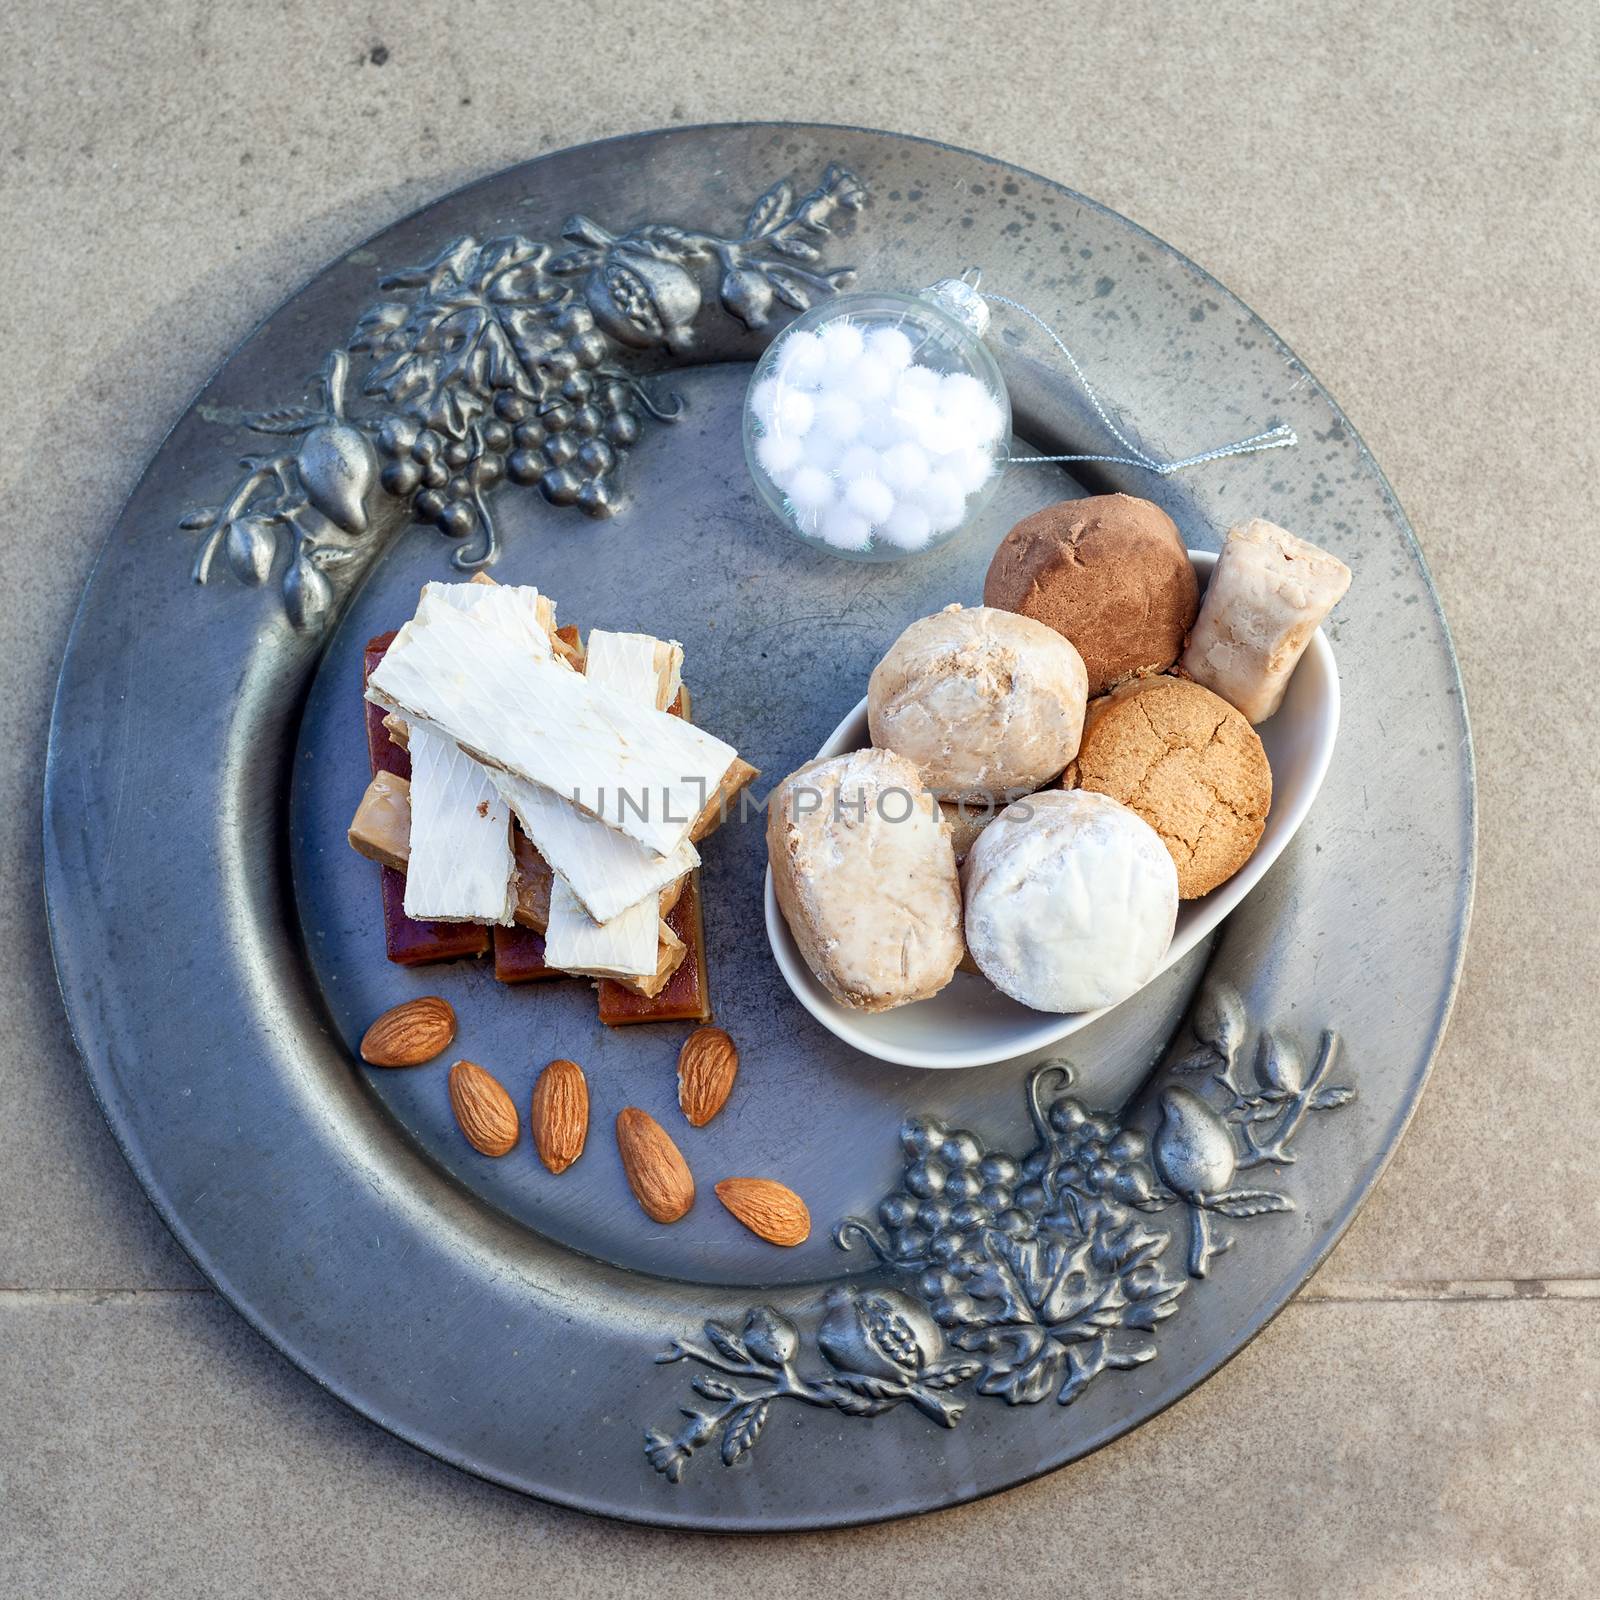 Turron, mantecados and polvorones, typical spanish christmas sweets by supercat67